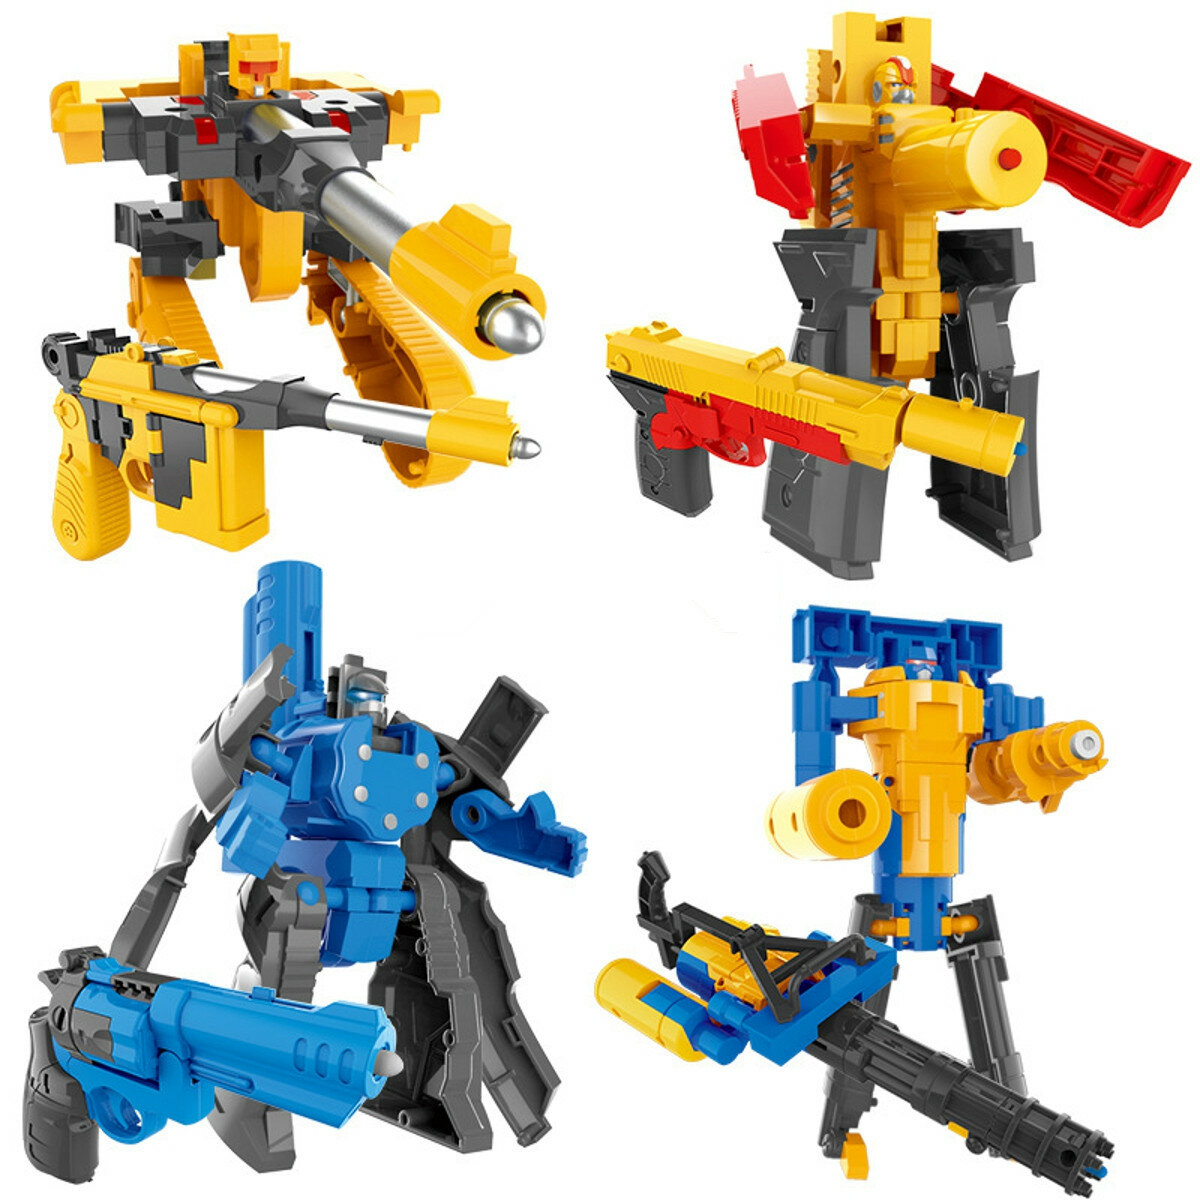 Childrens Deformation Pistol Robot Toy Puzzle DIY Assembly Toy Christmas Gift